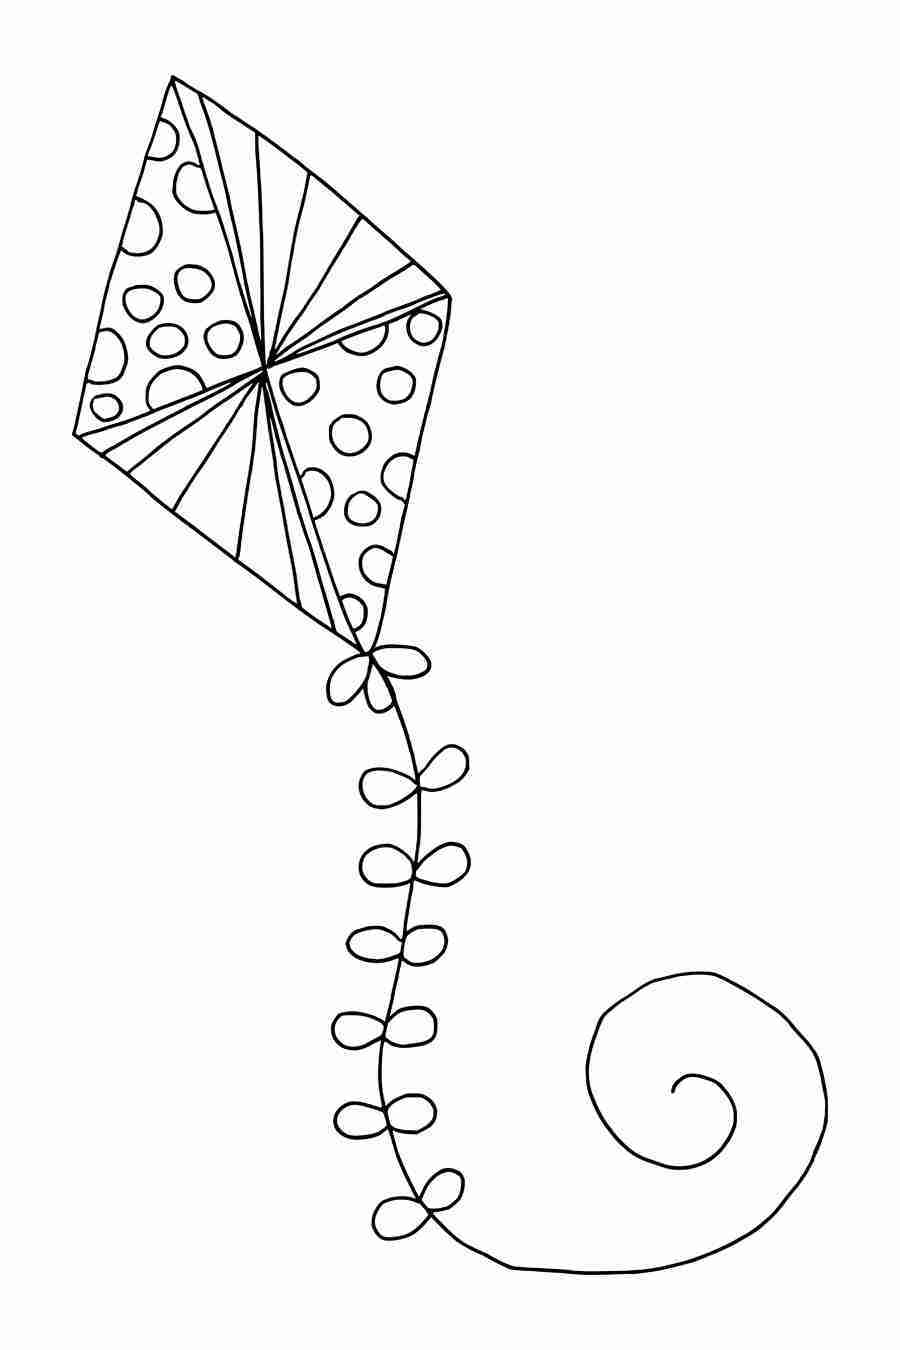 Kite Coloring Page at GetColorings.com | Free printable colorings pages